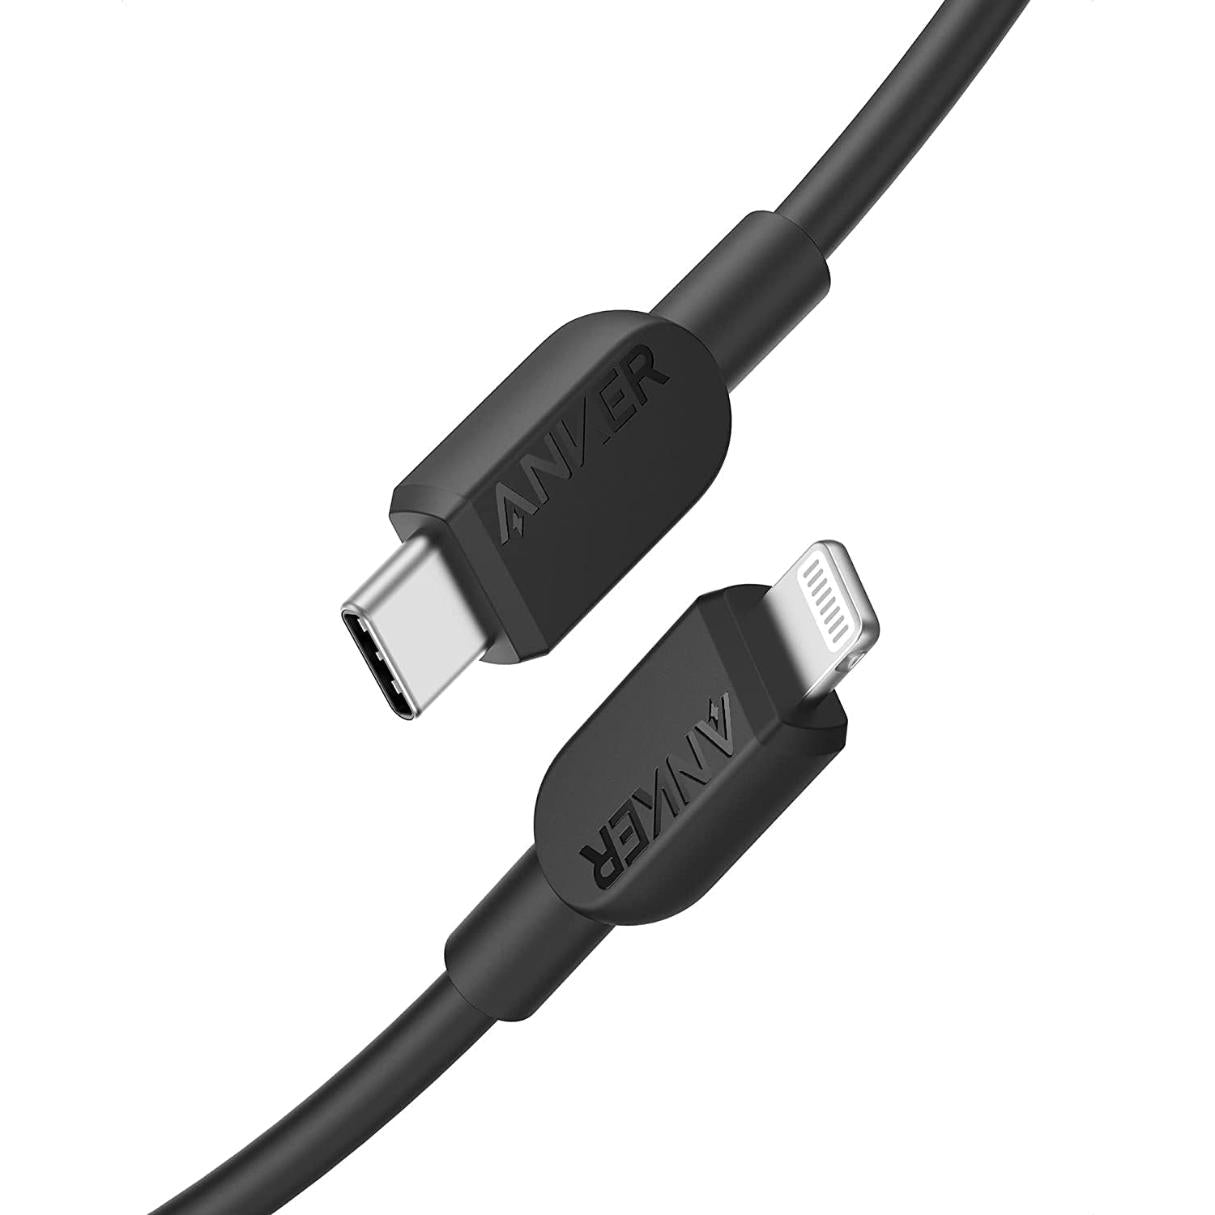 ANKER CABLE USB C - LIGHTNING 1.8M CON CERTIFICACIÓN MFi PARA IPHONE 14/13/12/11/X